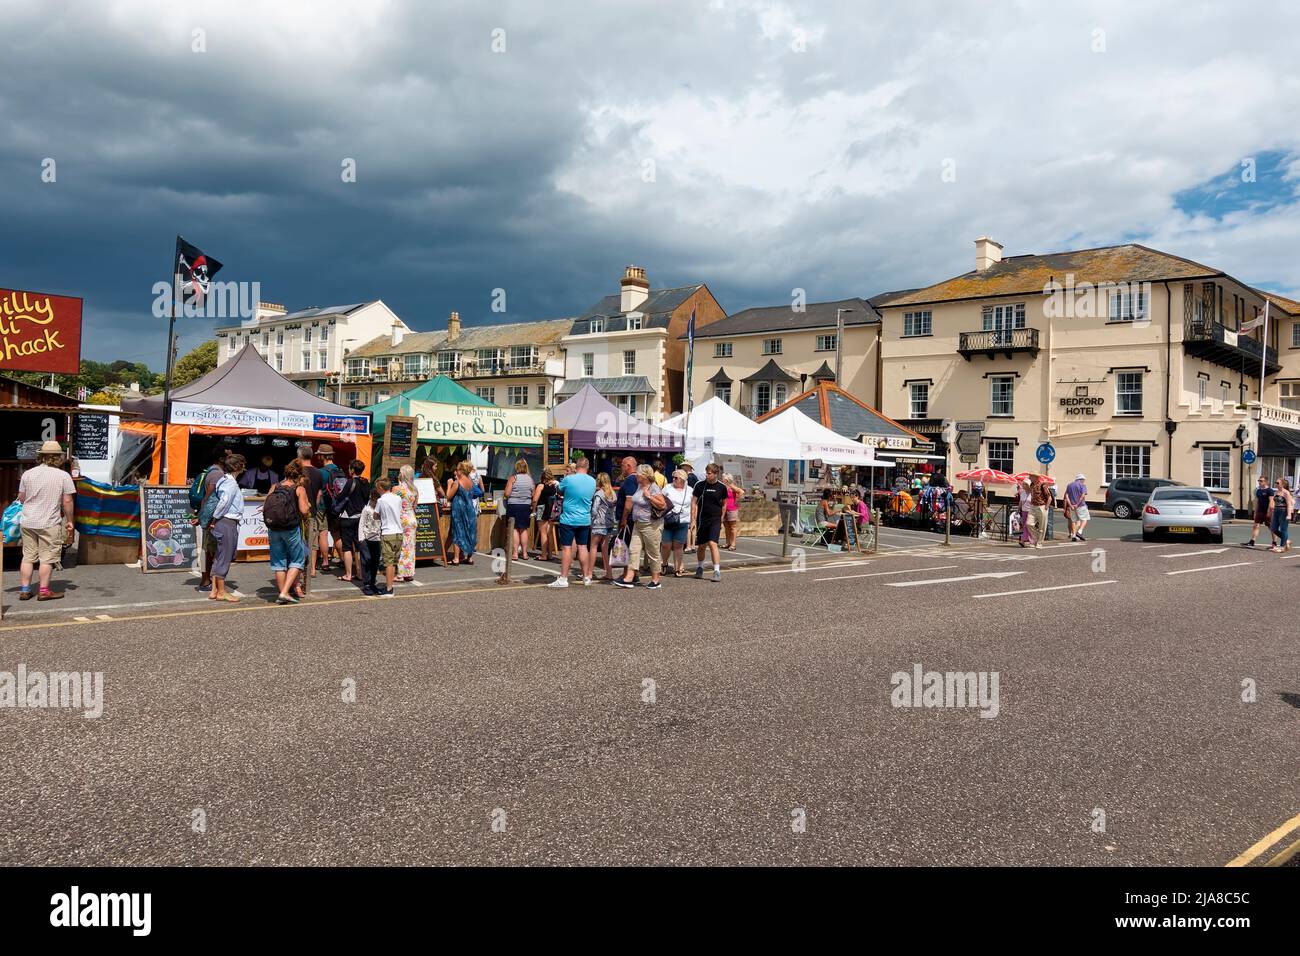 Sidmouth, Devon, UK - August 8 2018: The Esplanade at Sidmouth in Devon, England during the Sidmouth Folk Festival Week Stock Photo